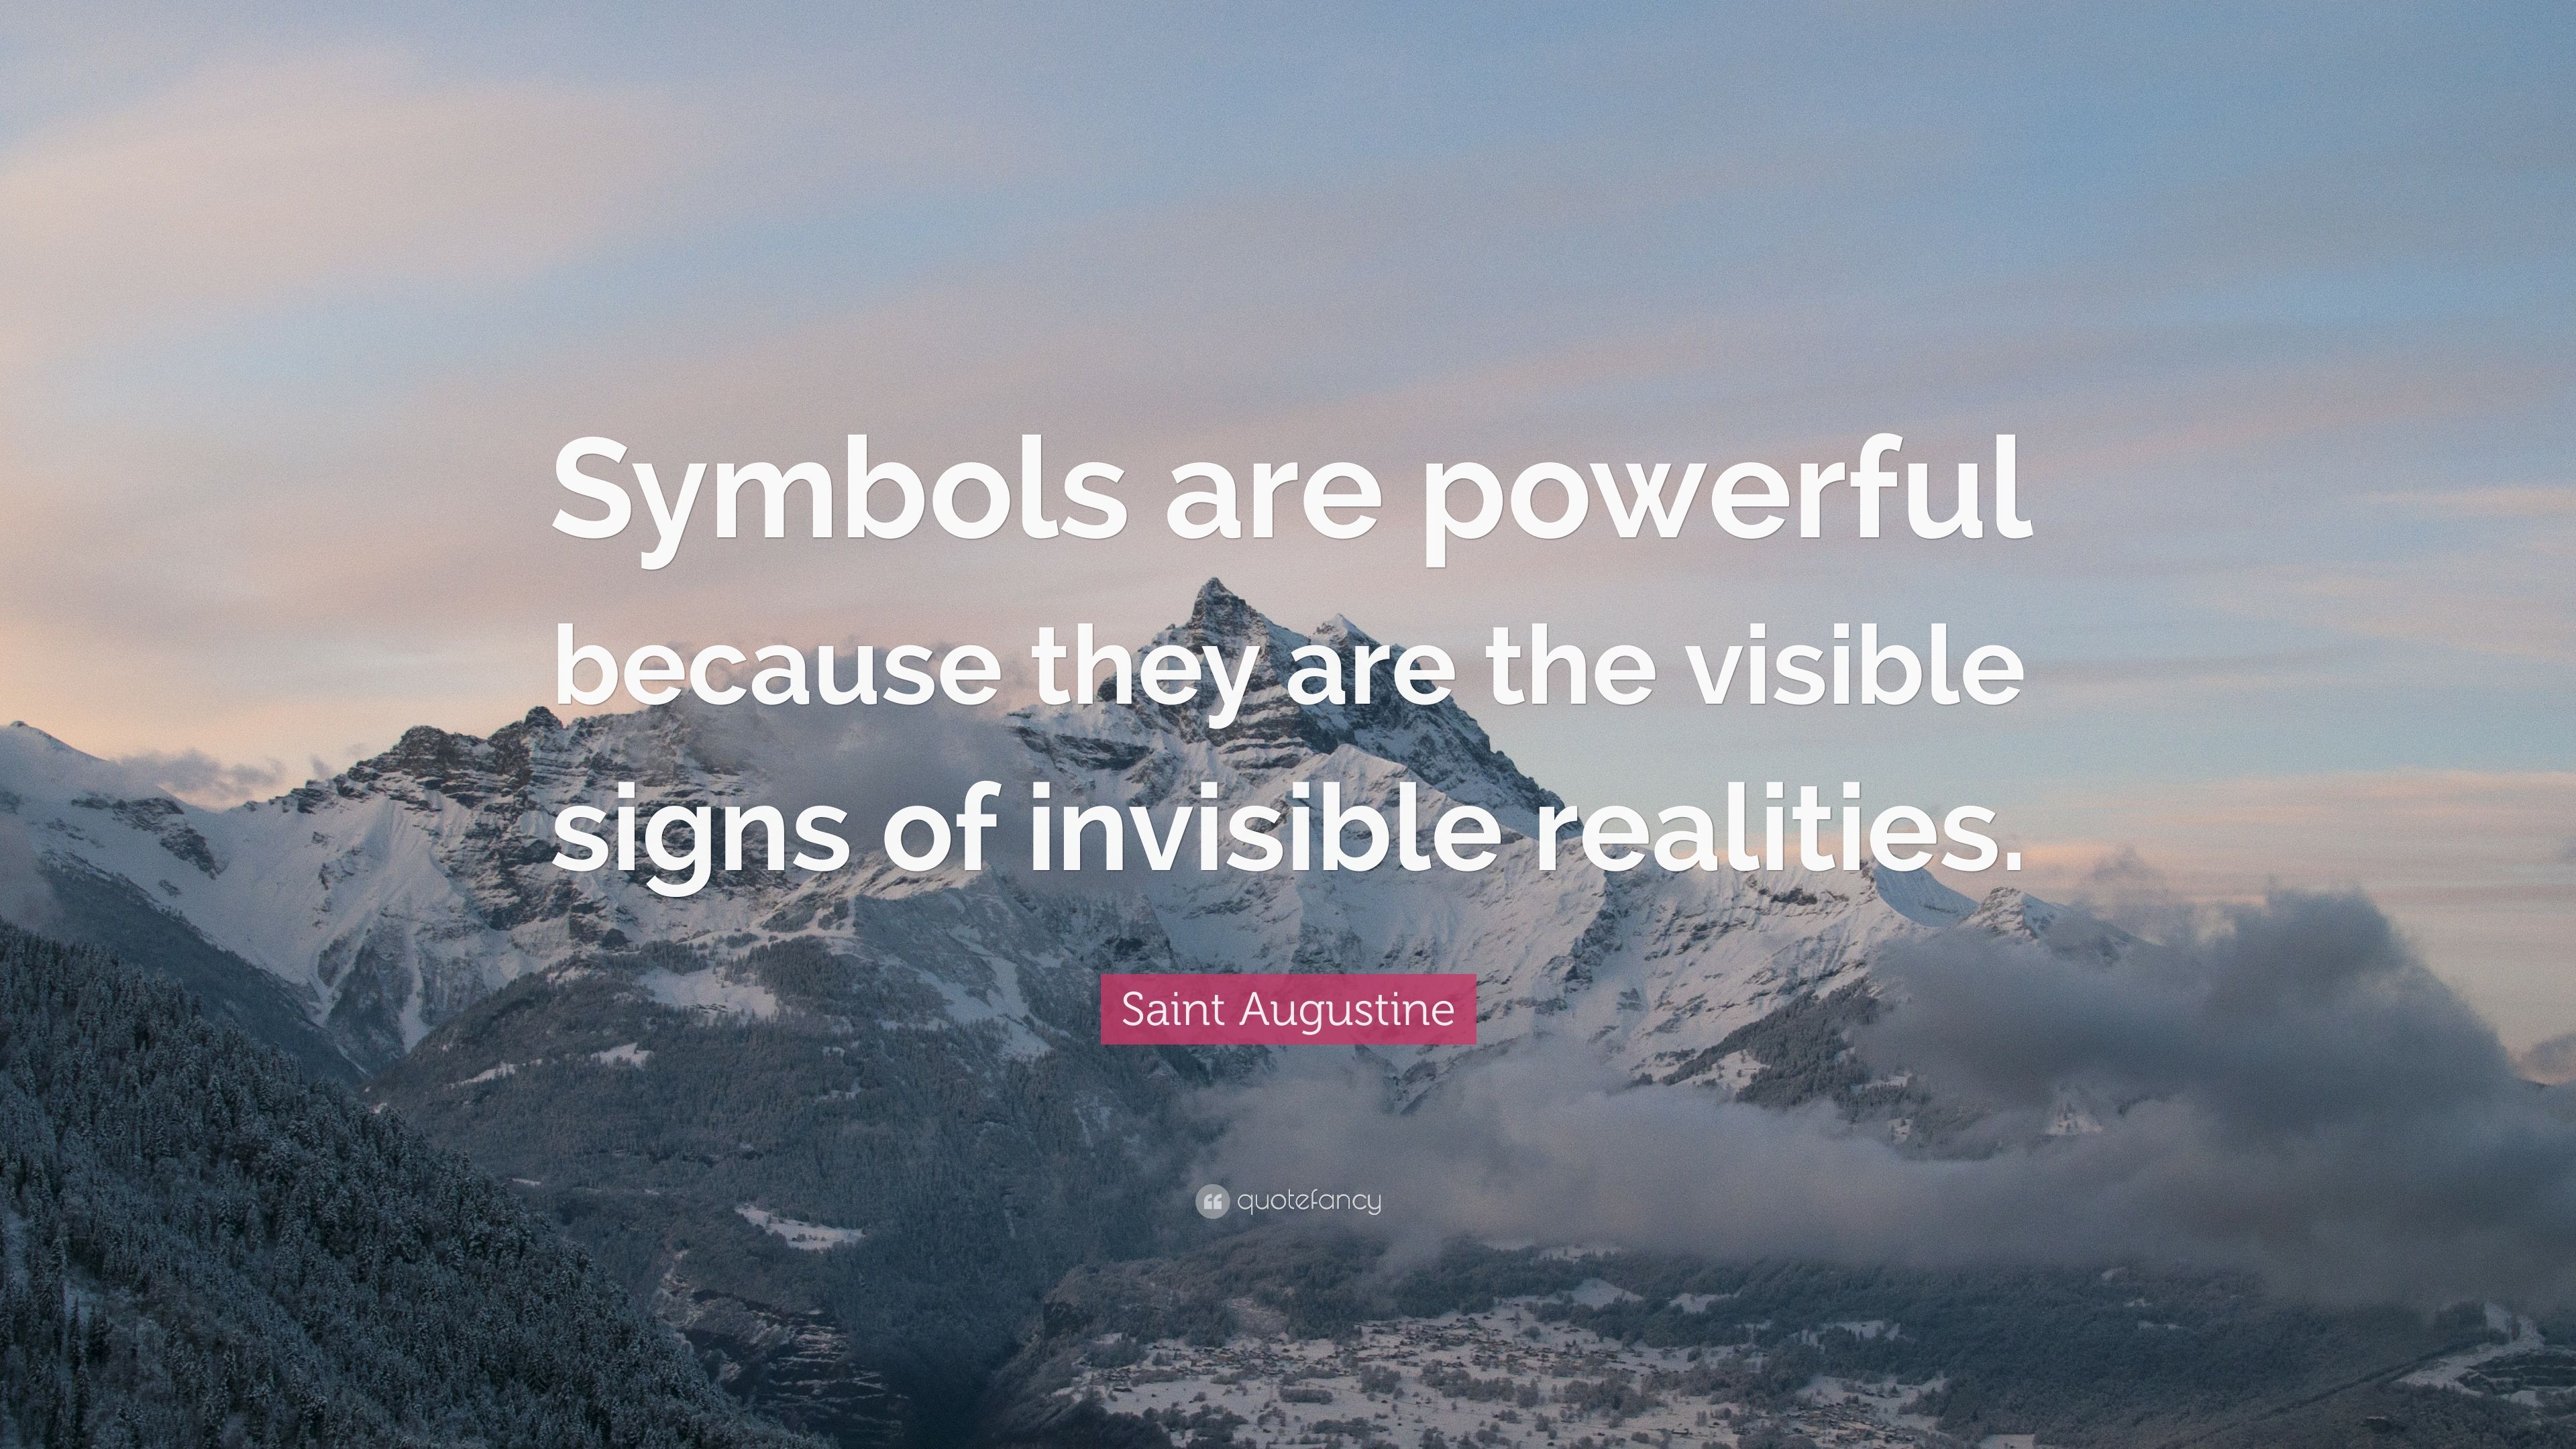 Saint Augustine Quote: “Symbols are powerful because they are